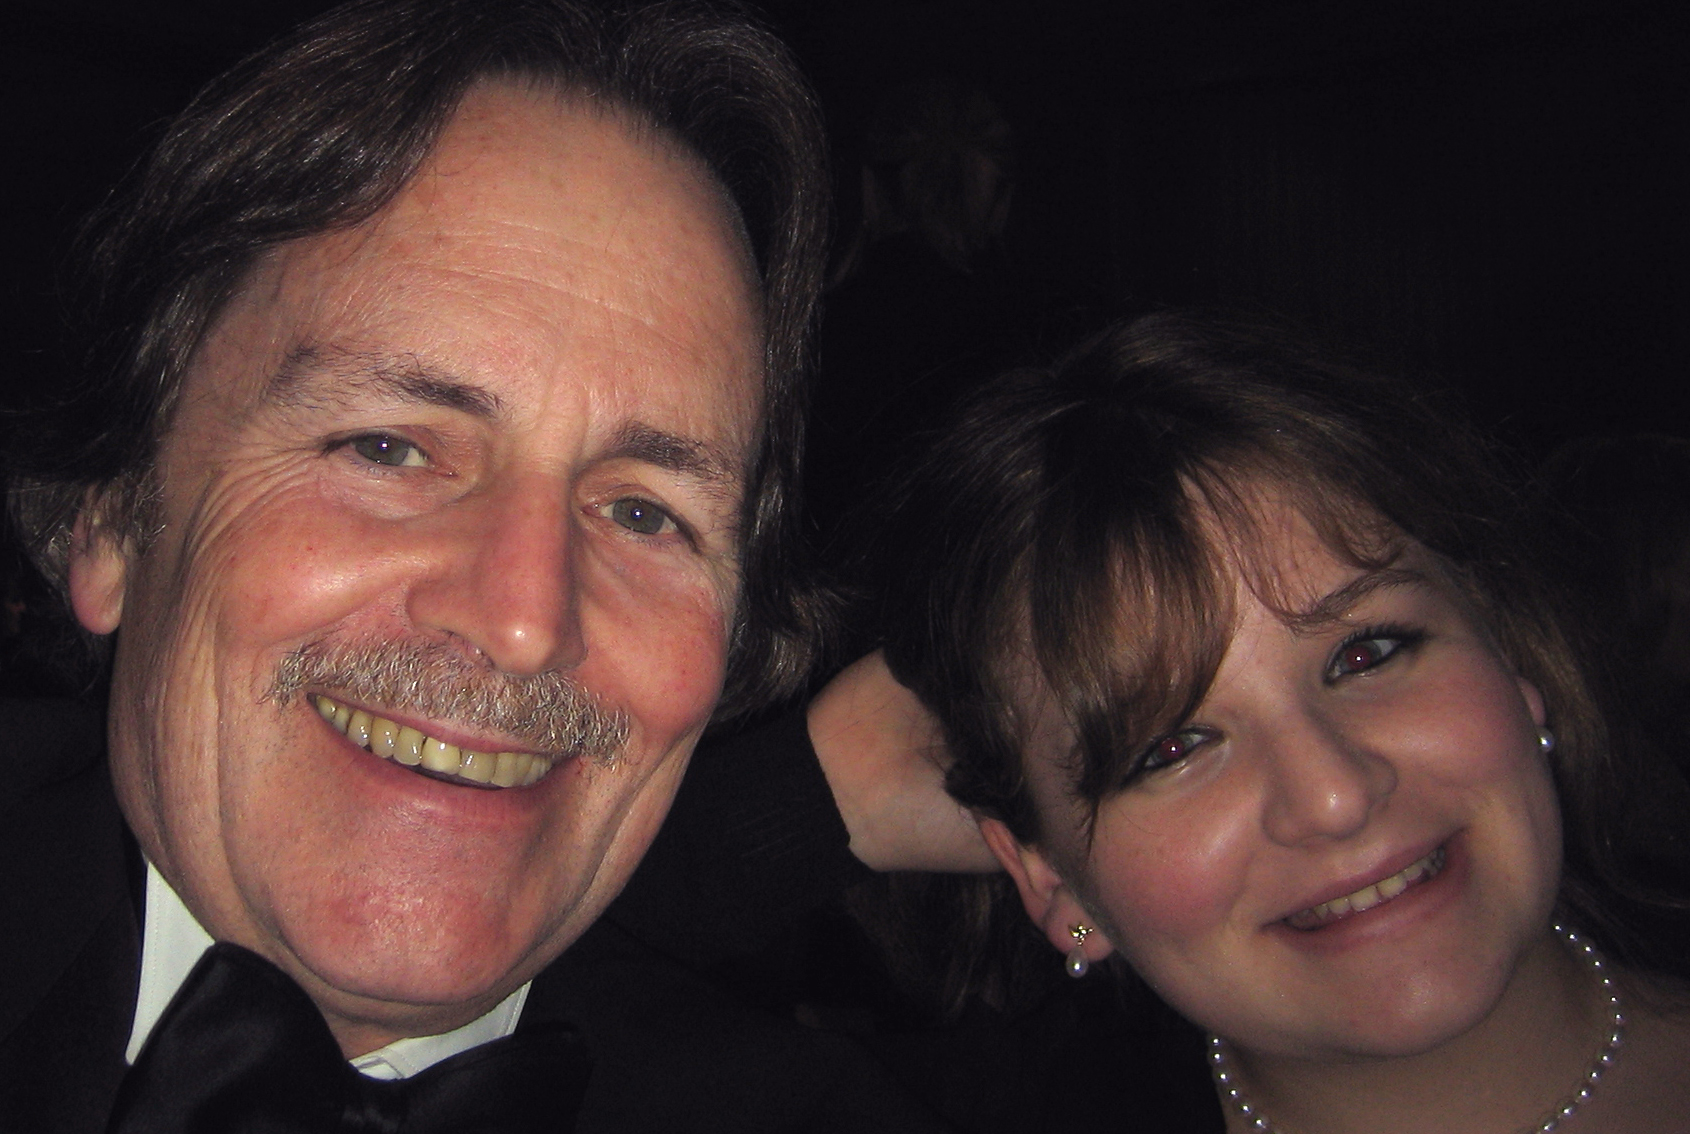 Roy H. Wagner and daughter Katherine at the ASC Awards